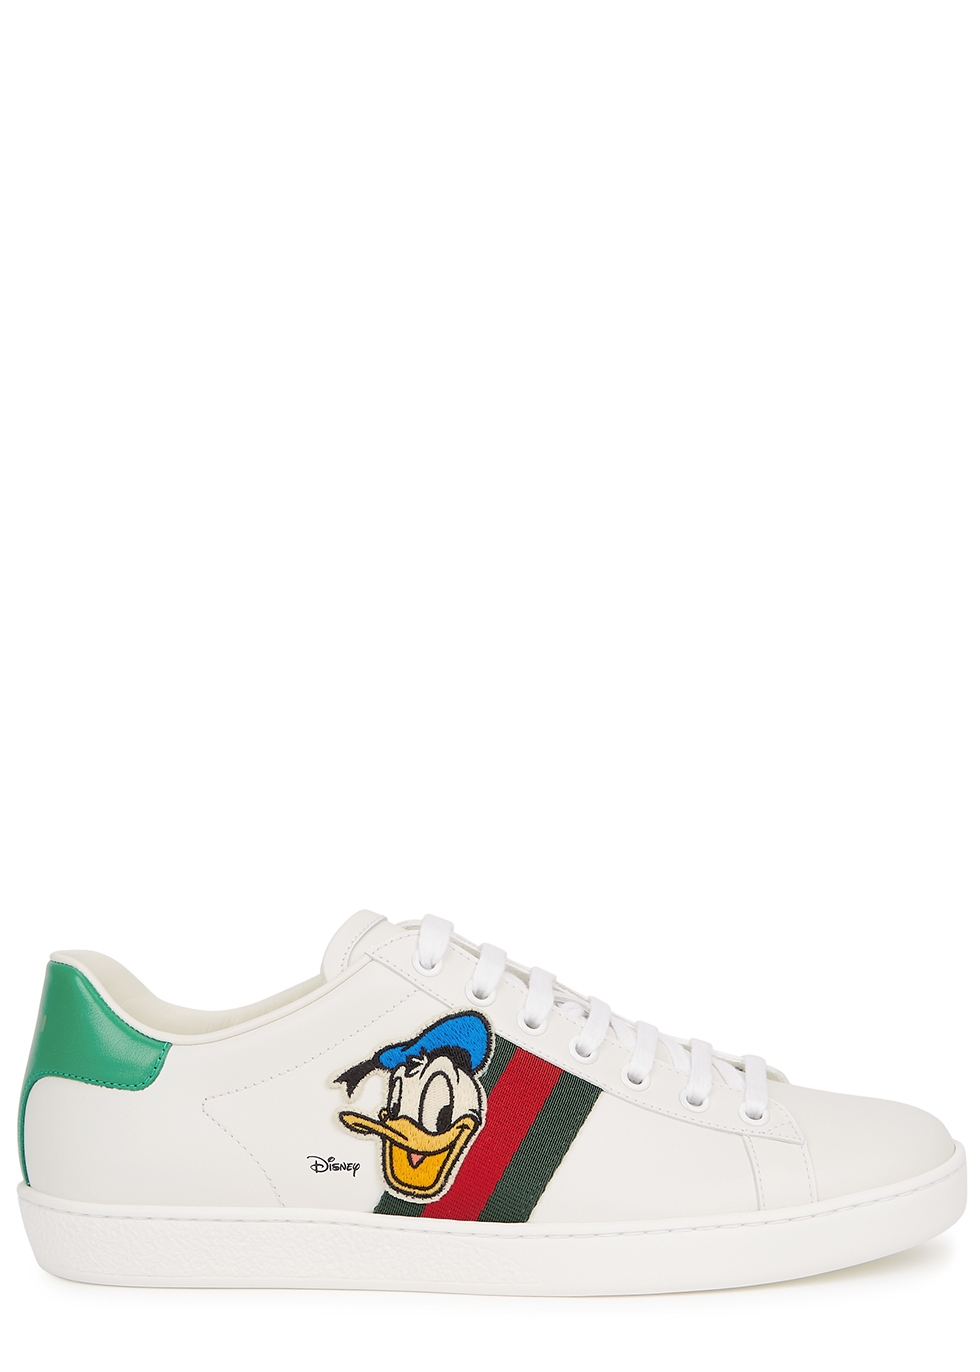 gucci trainers house of fraser